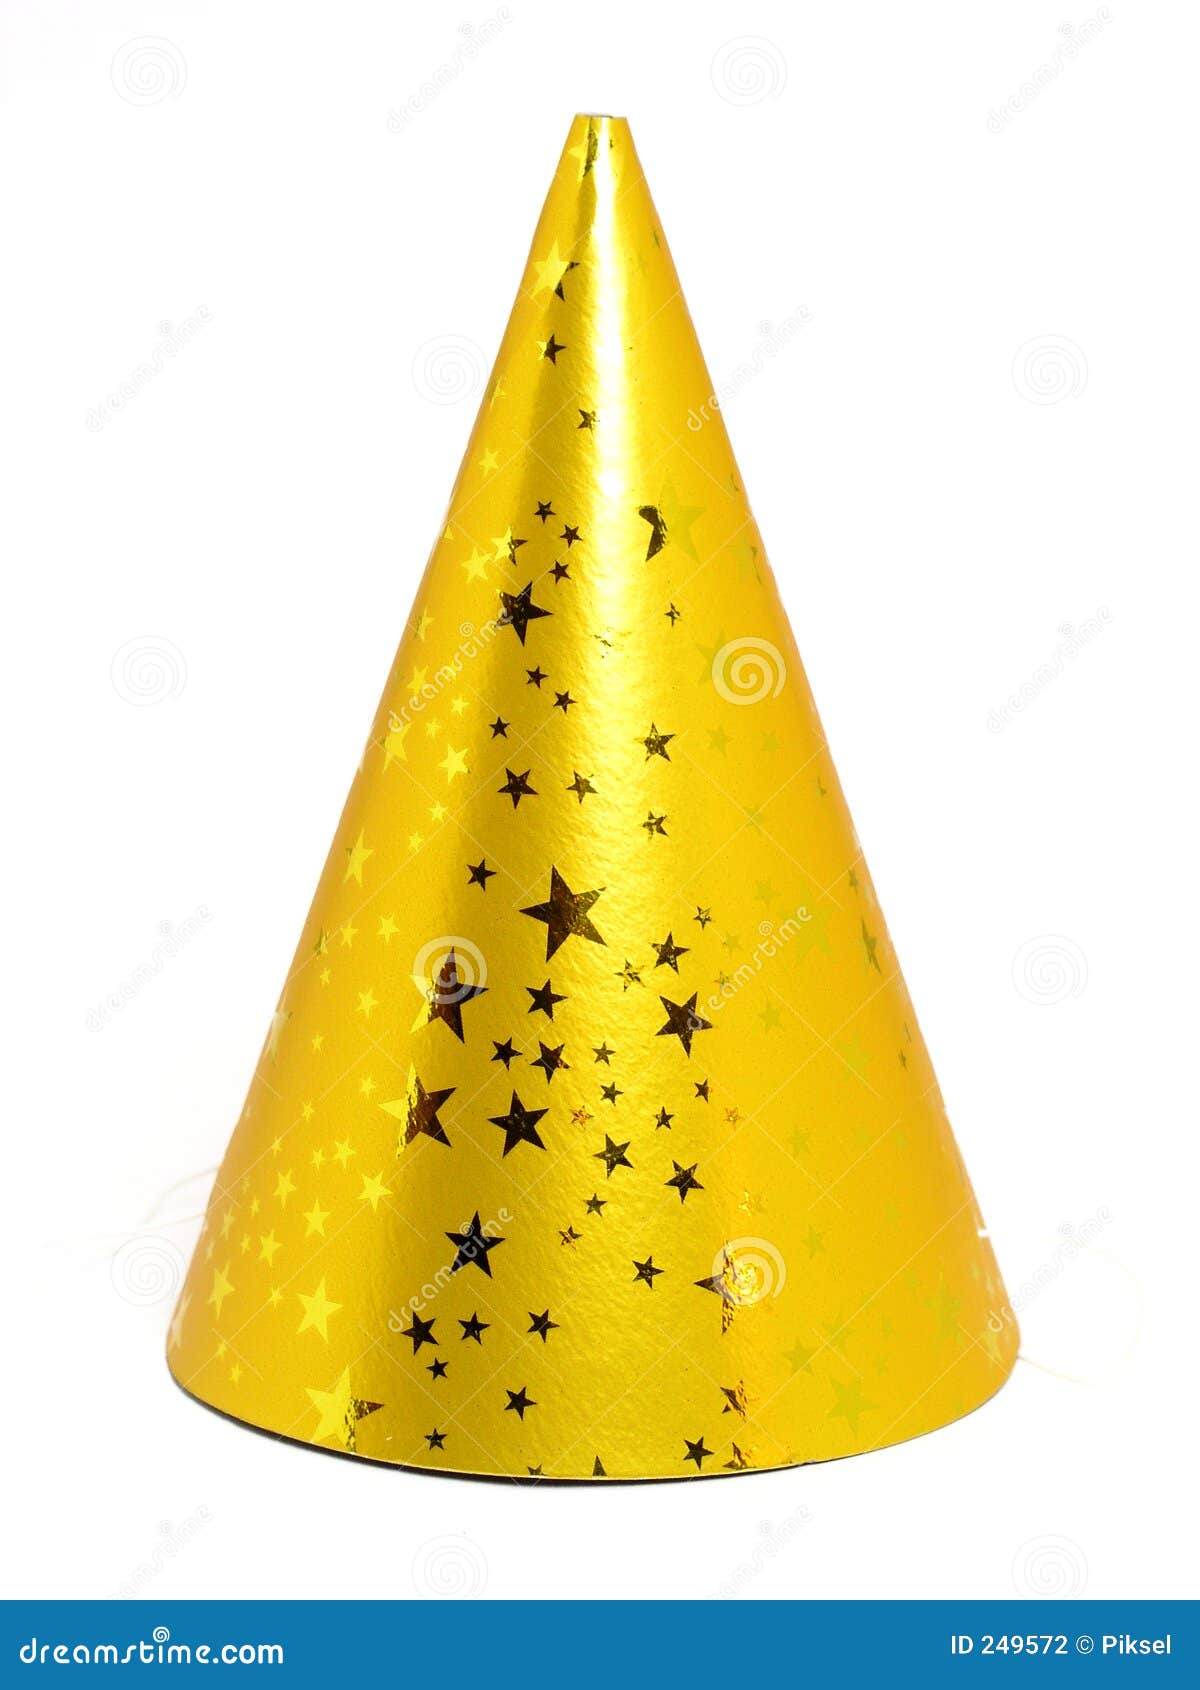 new years party hat clipart - photo #44